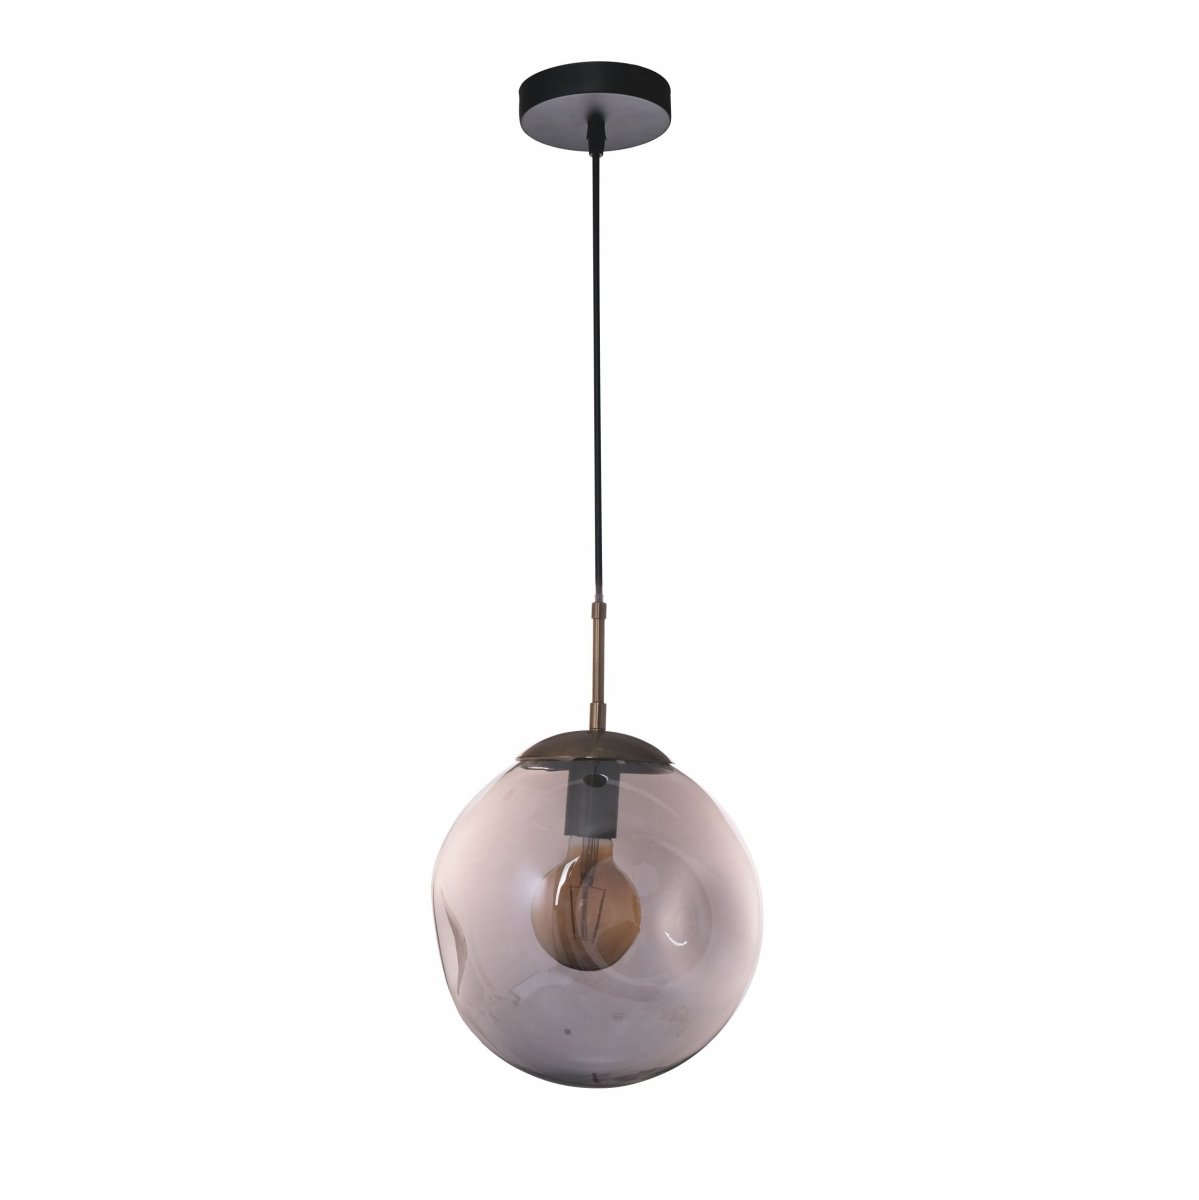 Main image of Smoky Glass Crater Pendant Light with E27 Fitting | TEKLED 159-17340